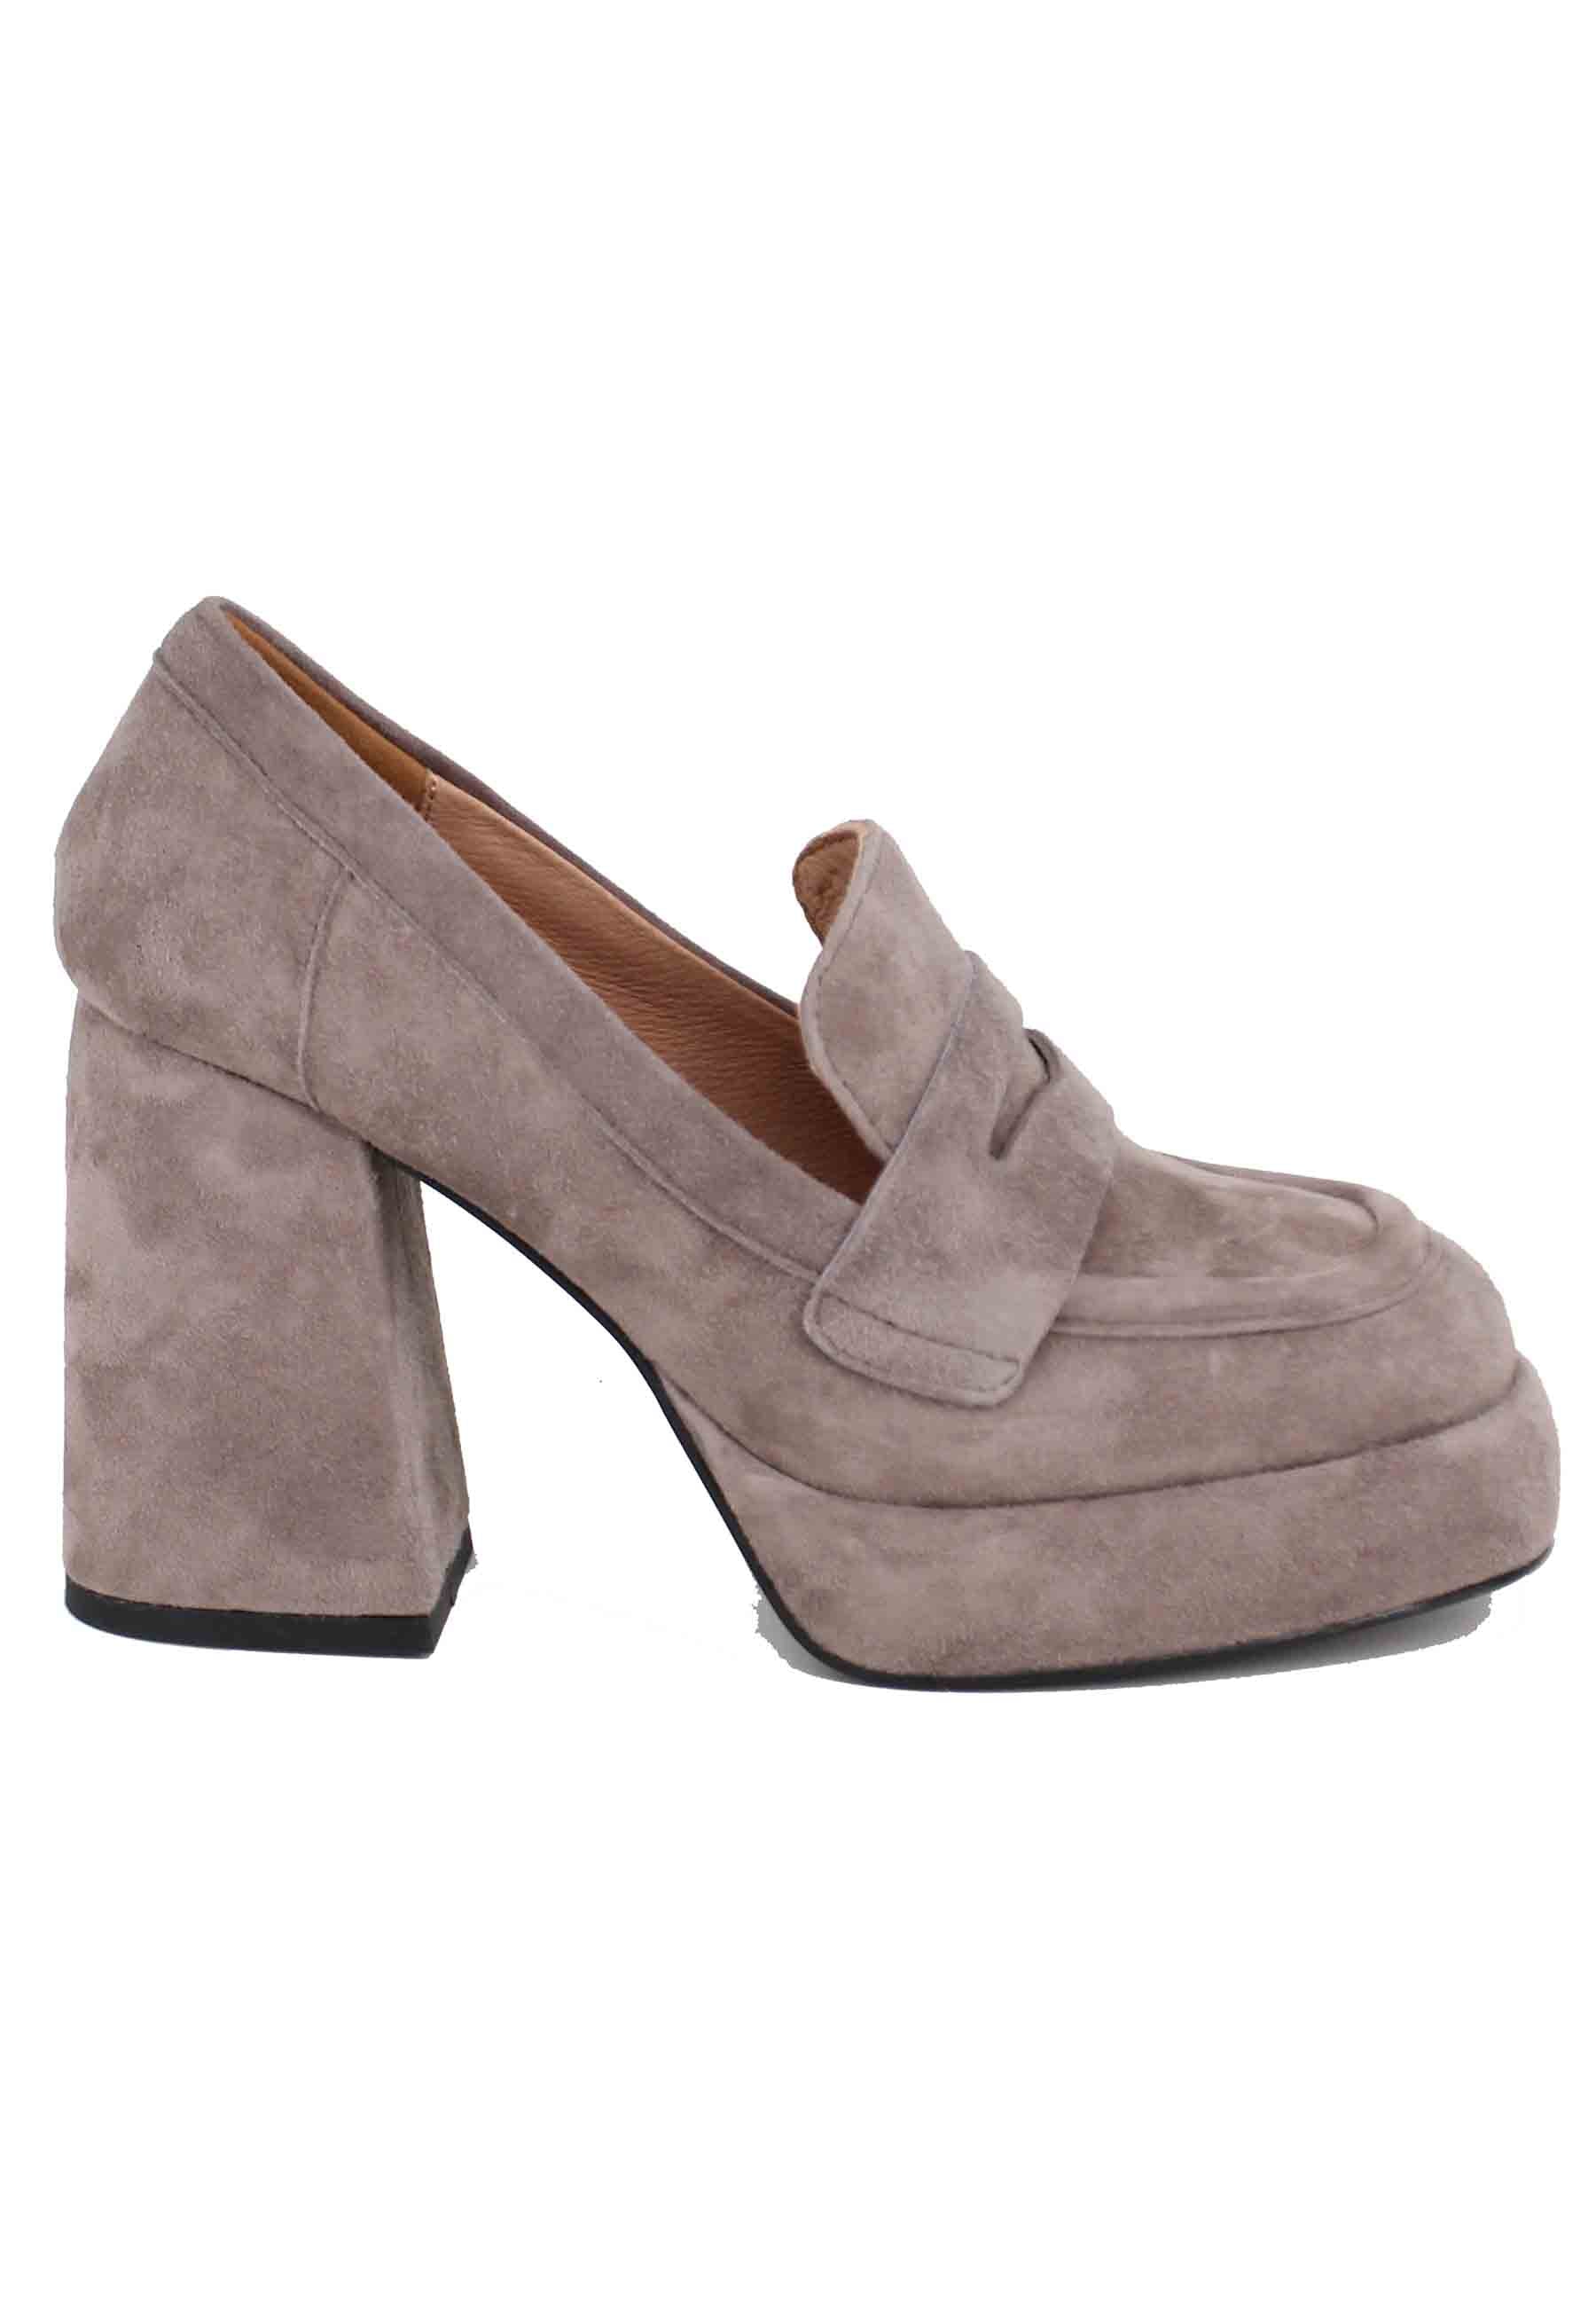 Women's loafers in gray suede with heel and plateau Natalie